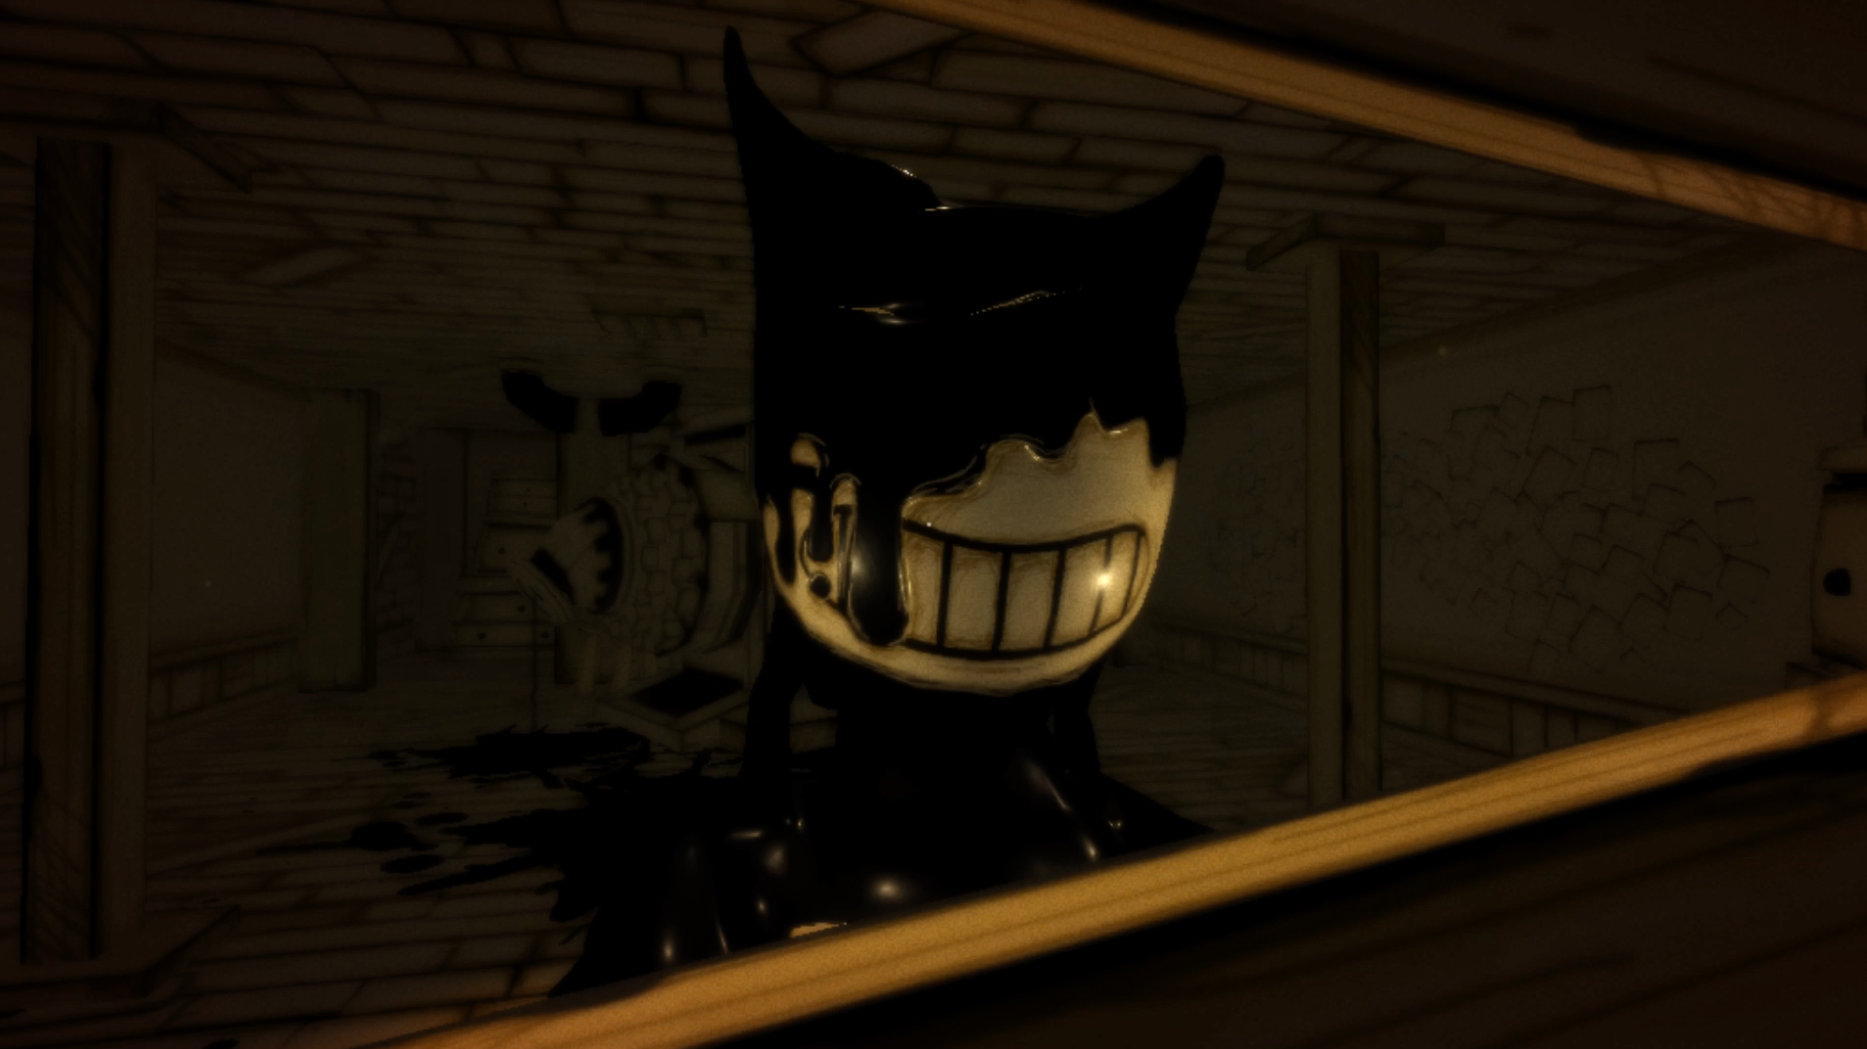 Bendy and the Ink Machine (Mac) - Download